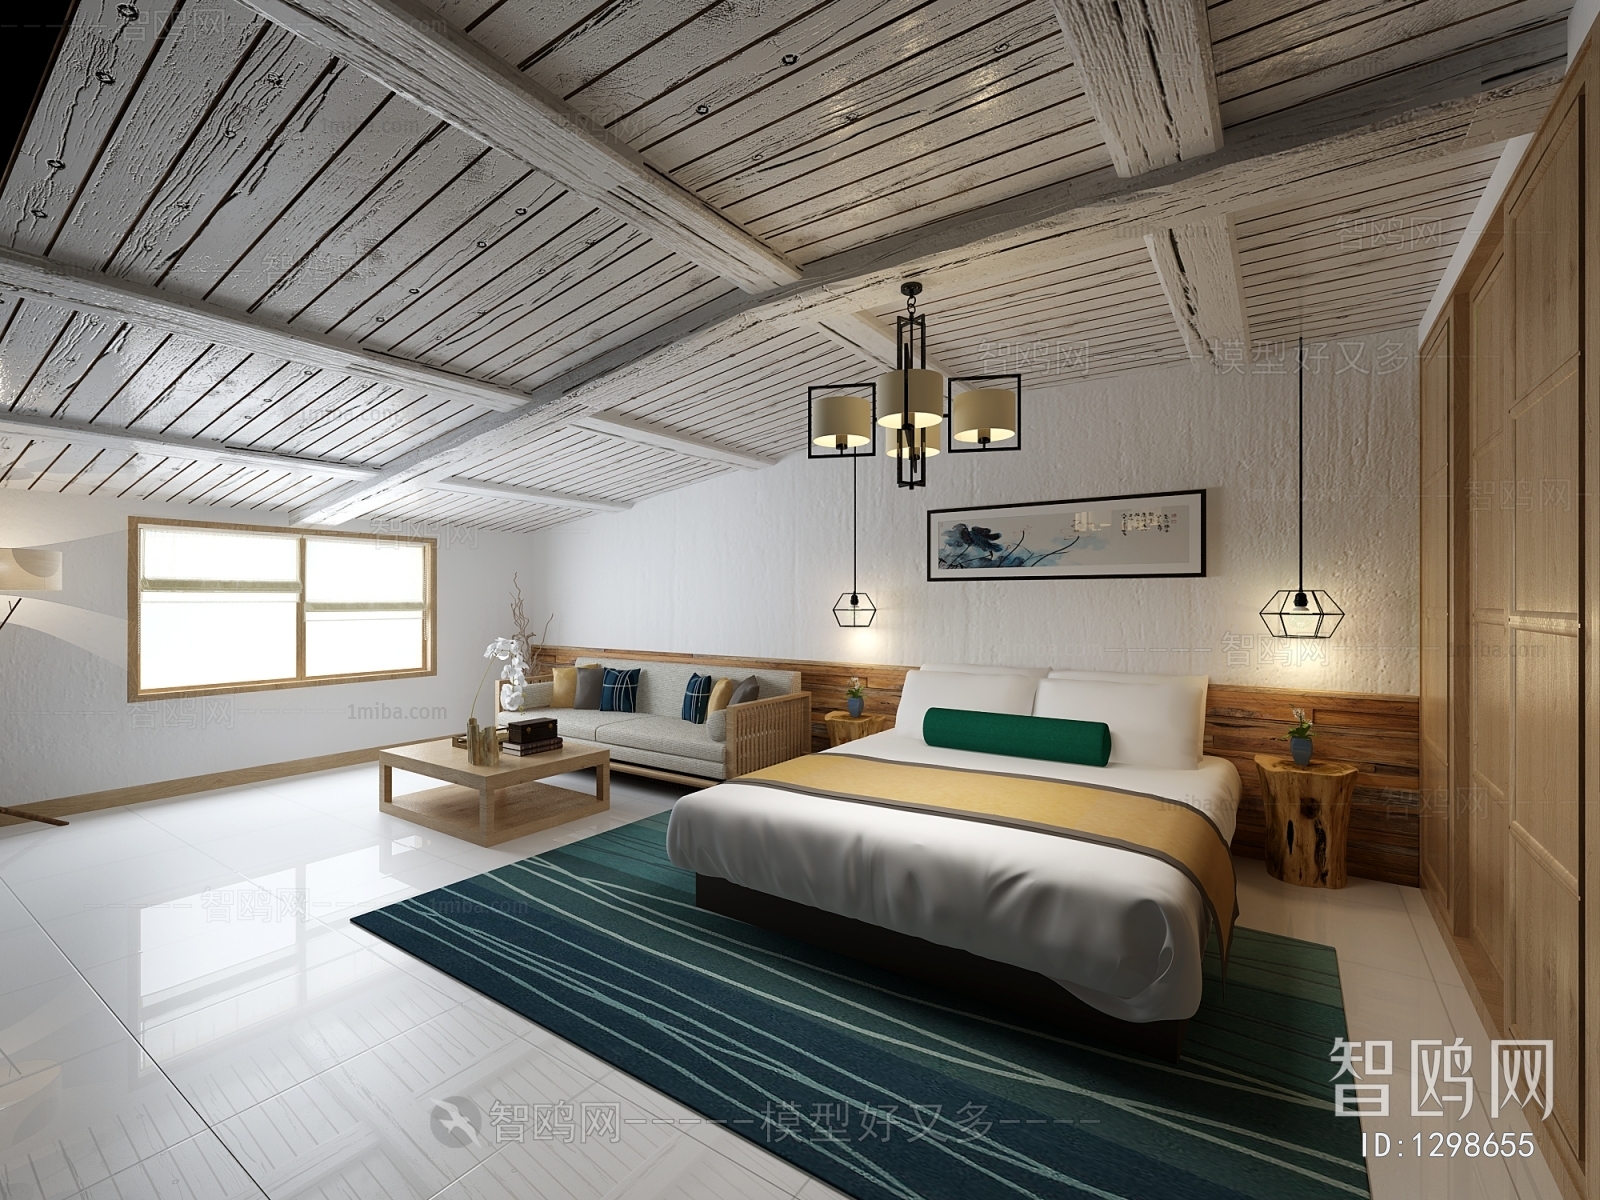 Modern New Chinese Style Guest Room